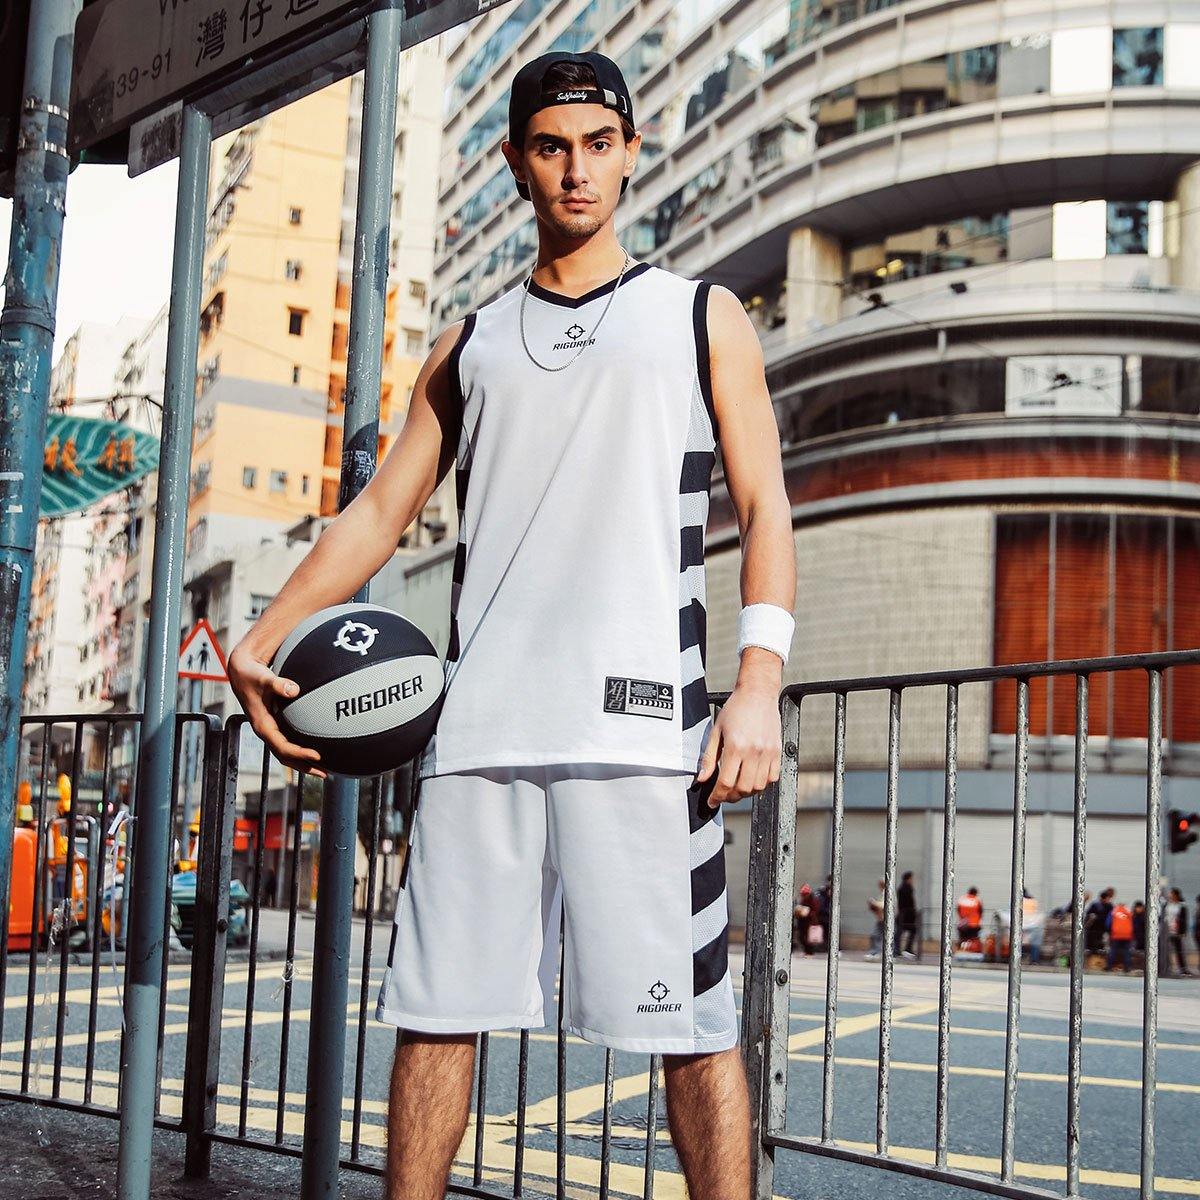 Reversible Sports Wear Basketball Jersey Mesh Polyester Quick Dry